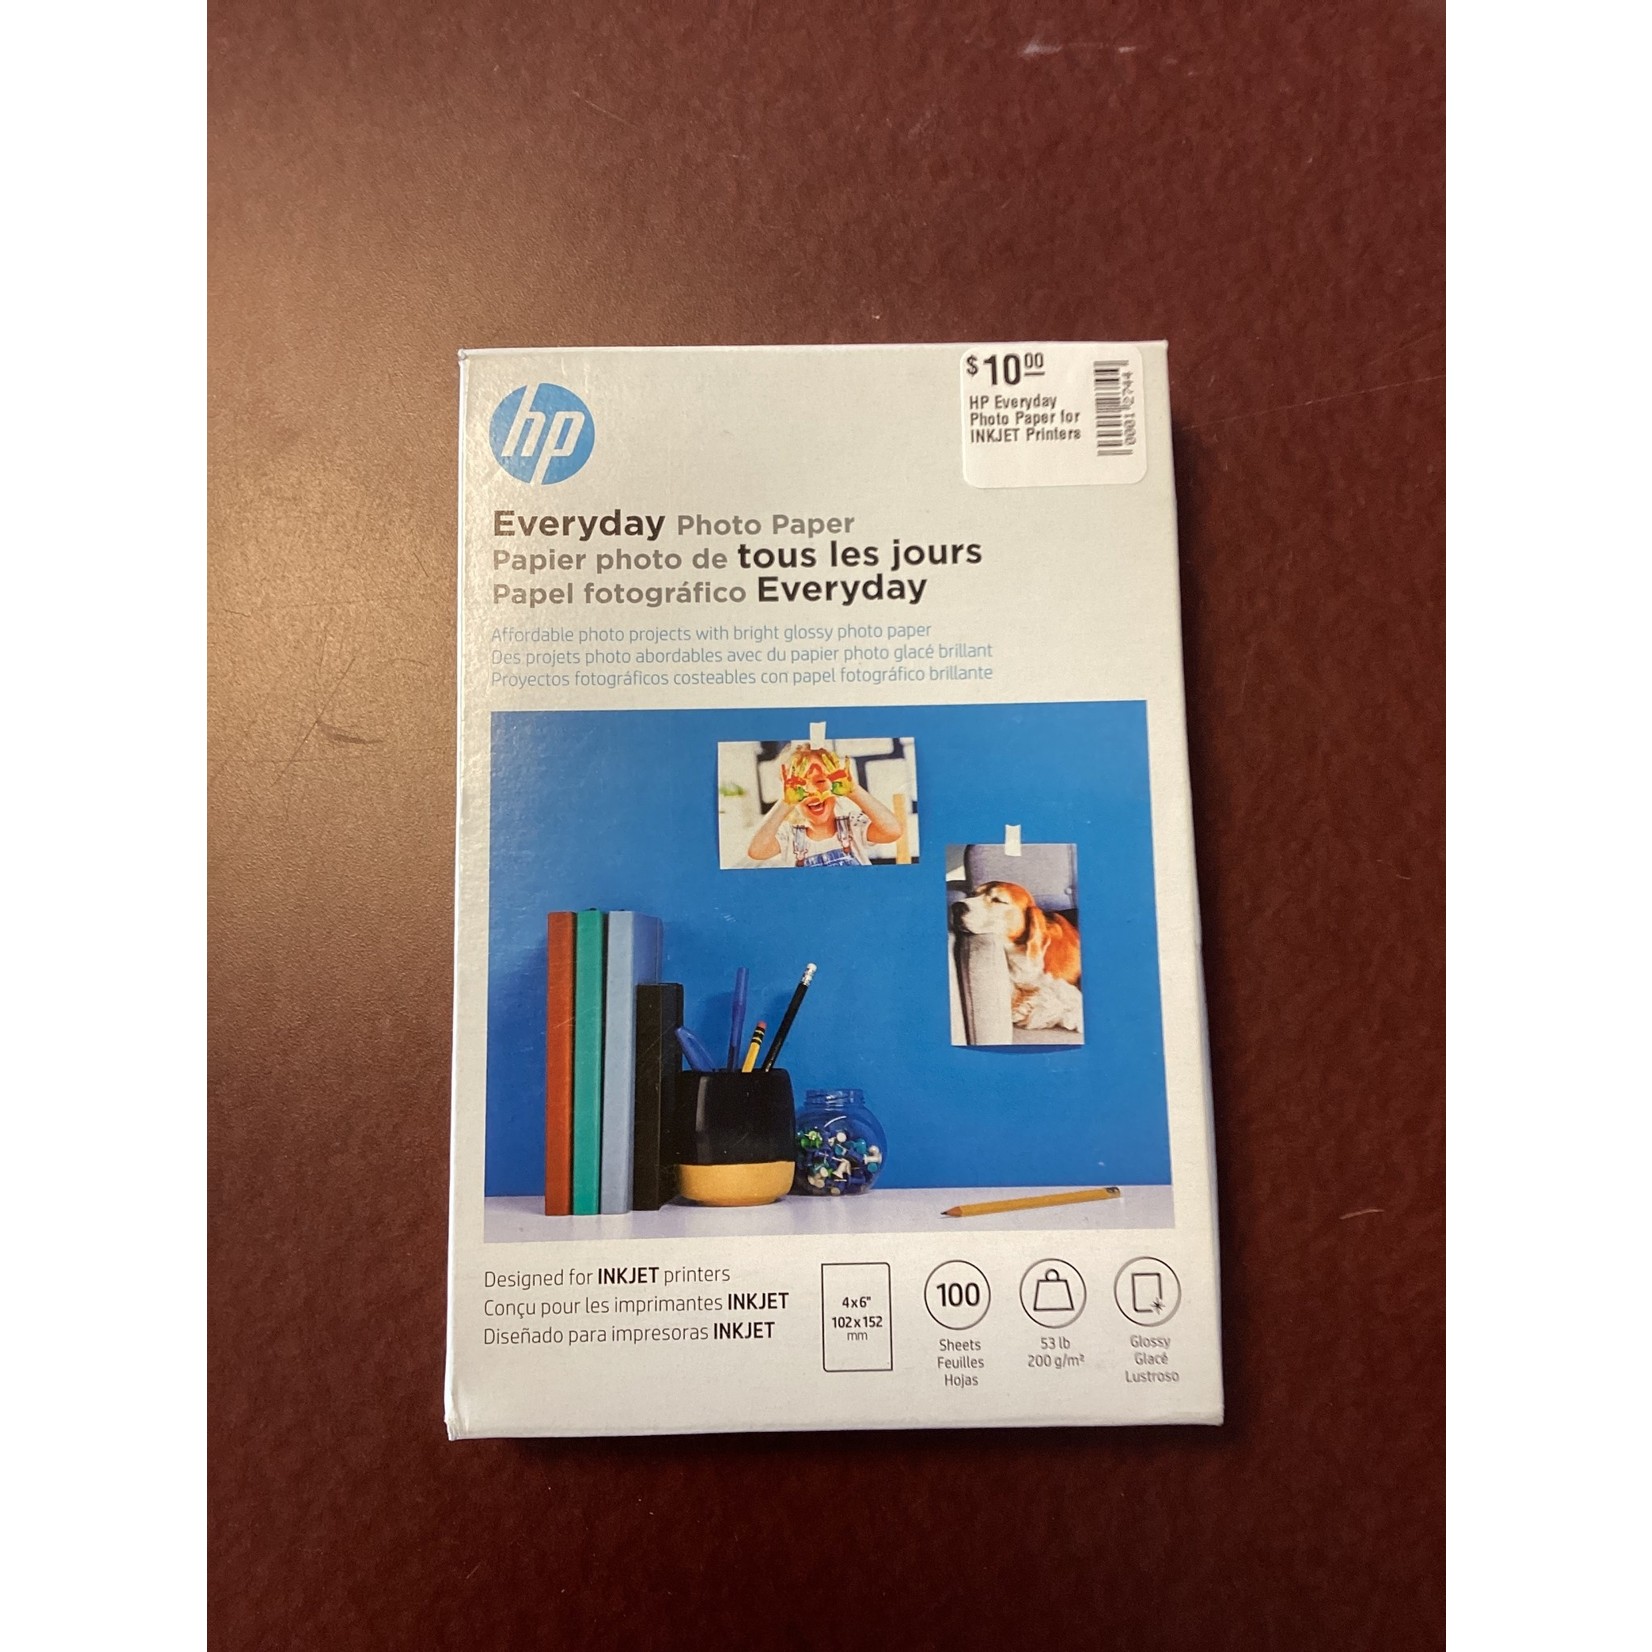 HP Everyday Photo Paper for INKJET Printers